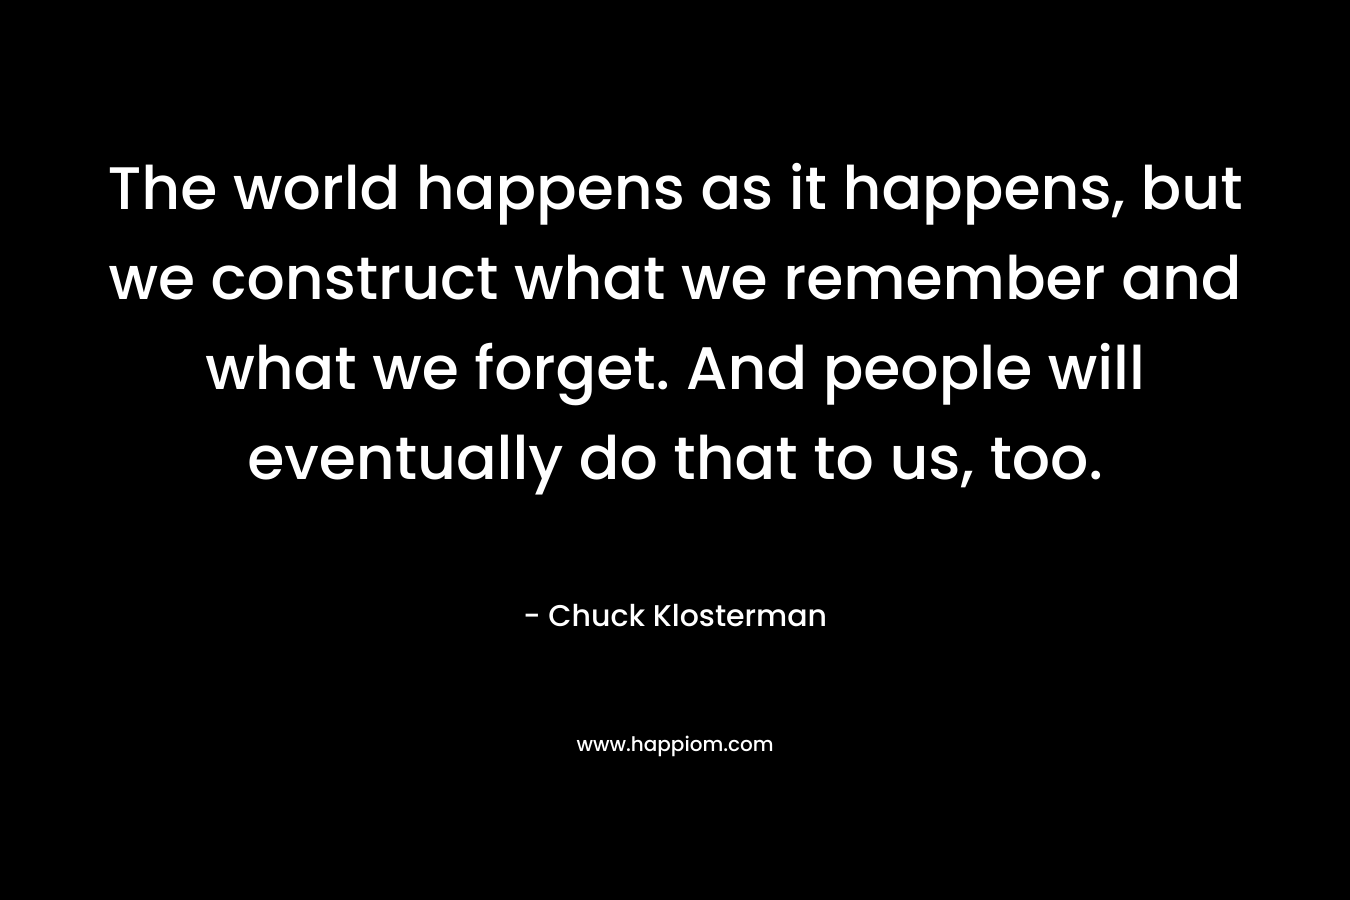 The world happens as it happens, but we construct what we remember and what we forget. And people will eventually do that to us, too.